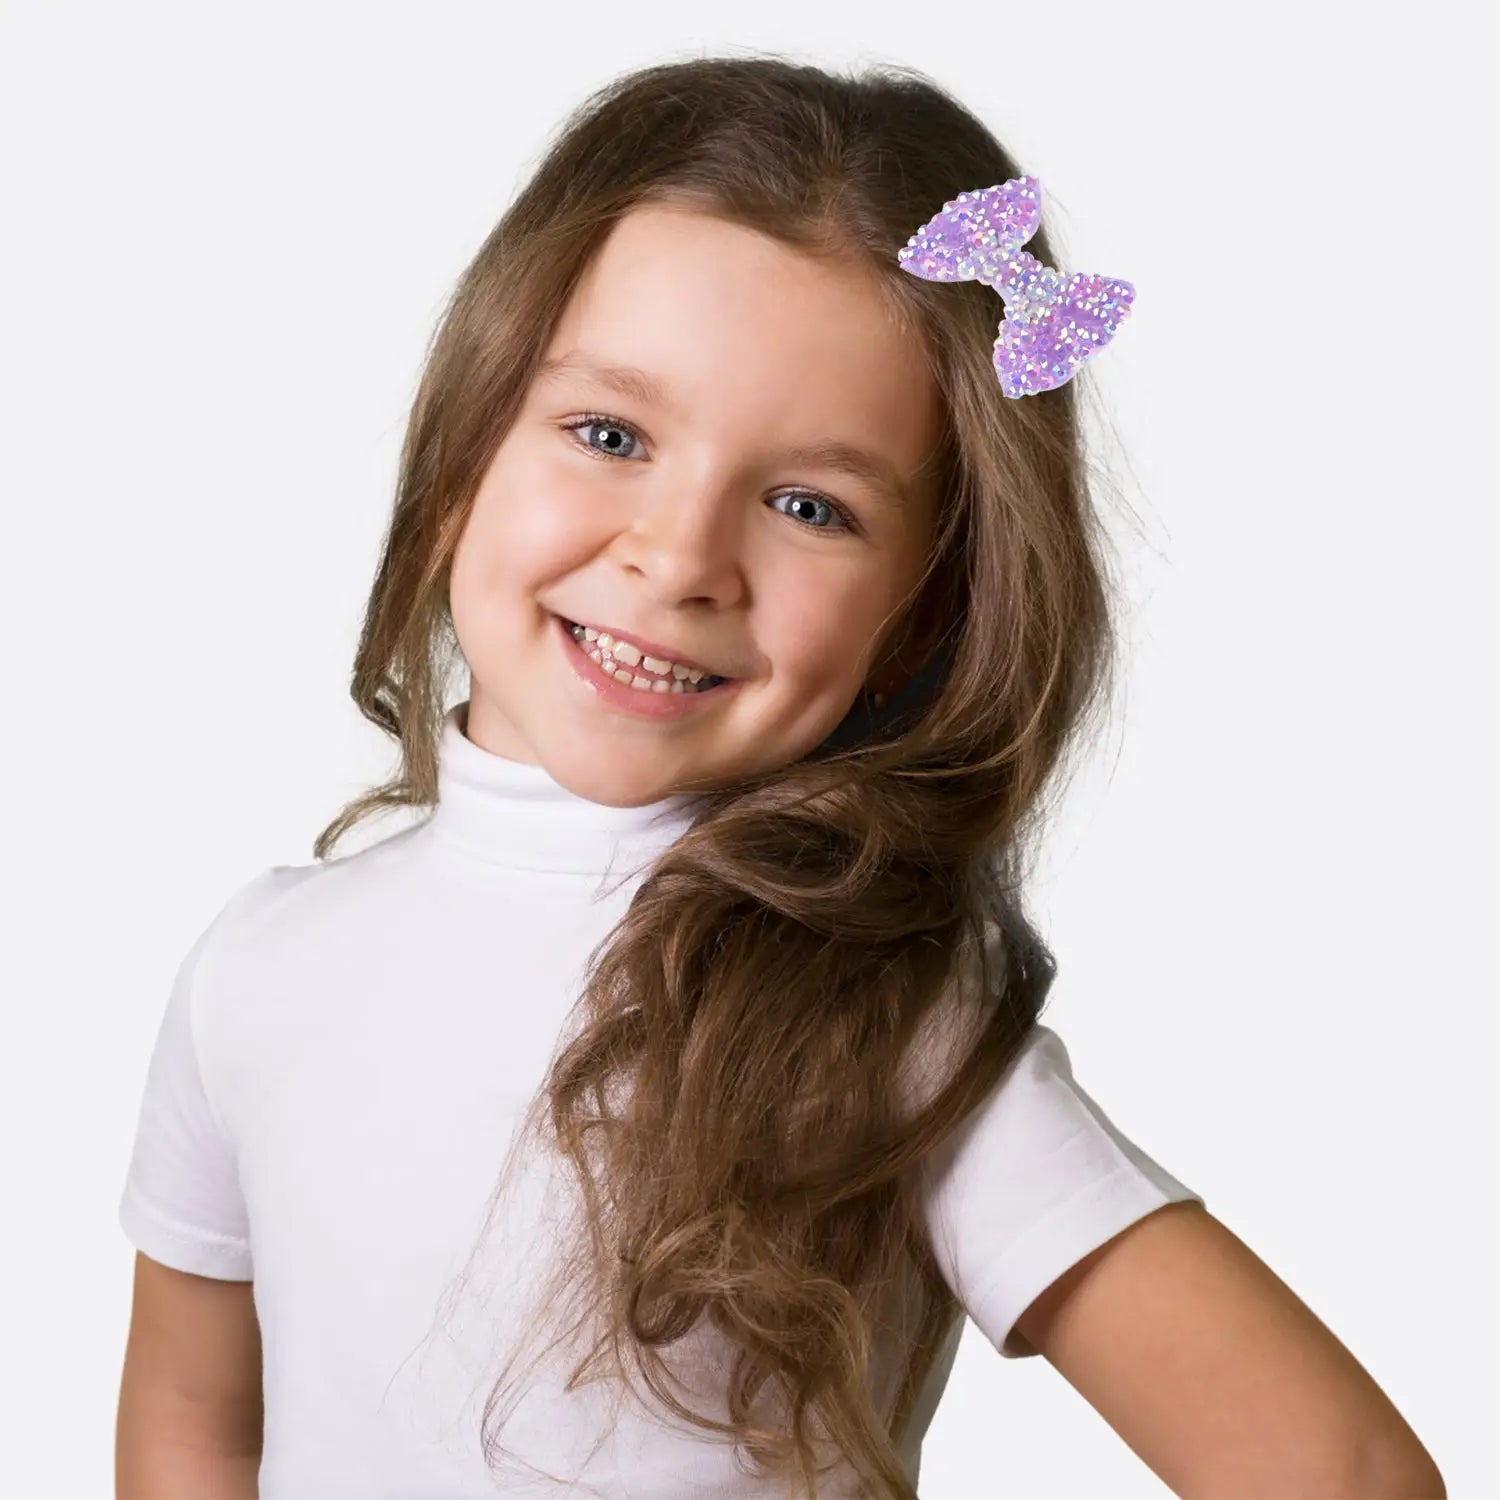 Little girl wearing Sparkling Bow Rhinestone Hair Clips with purple butterfly.